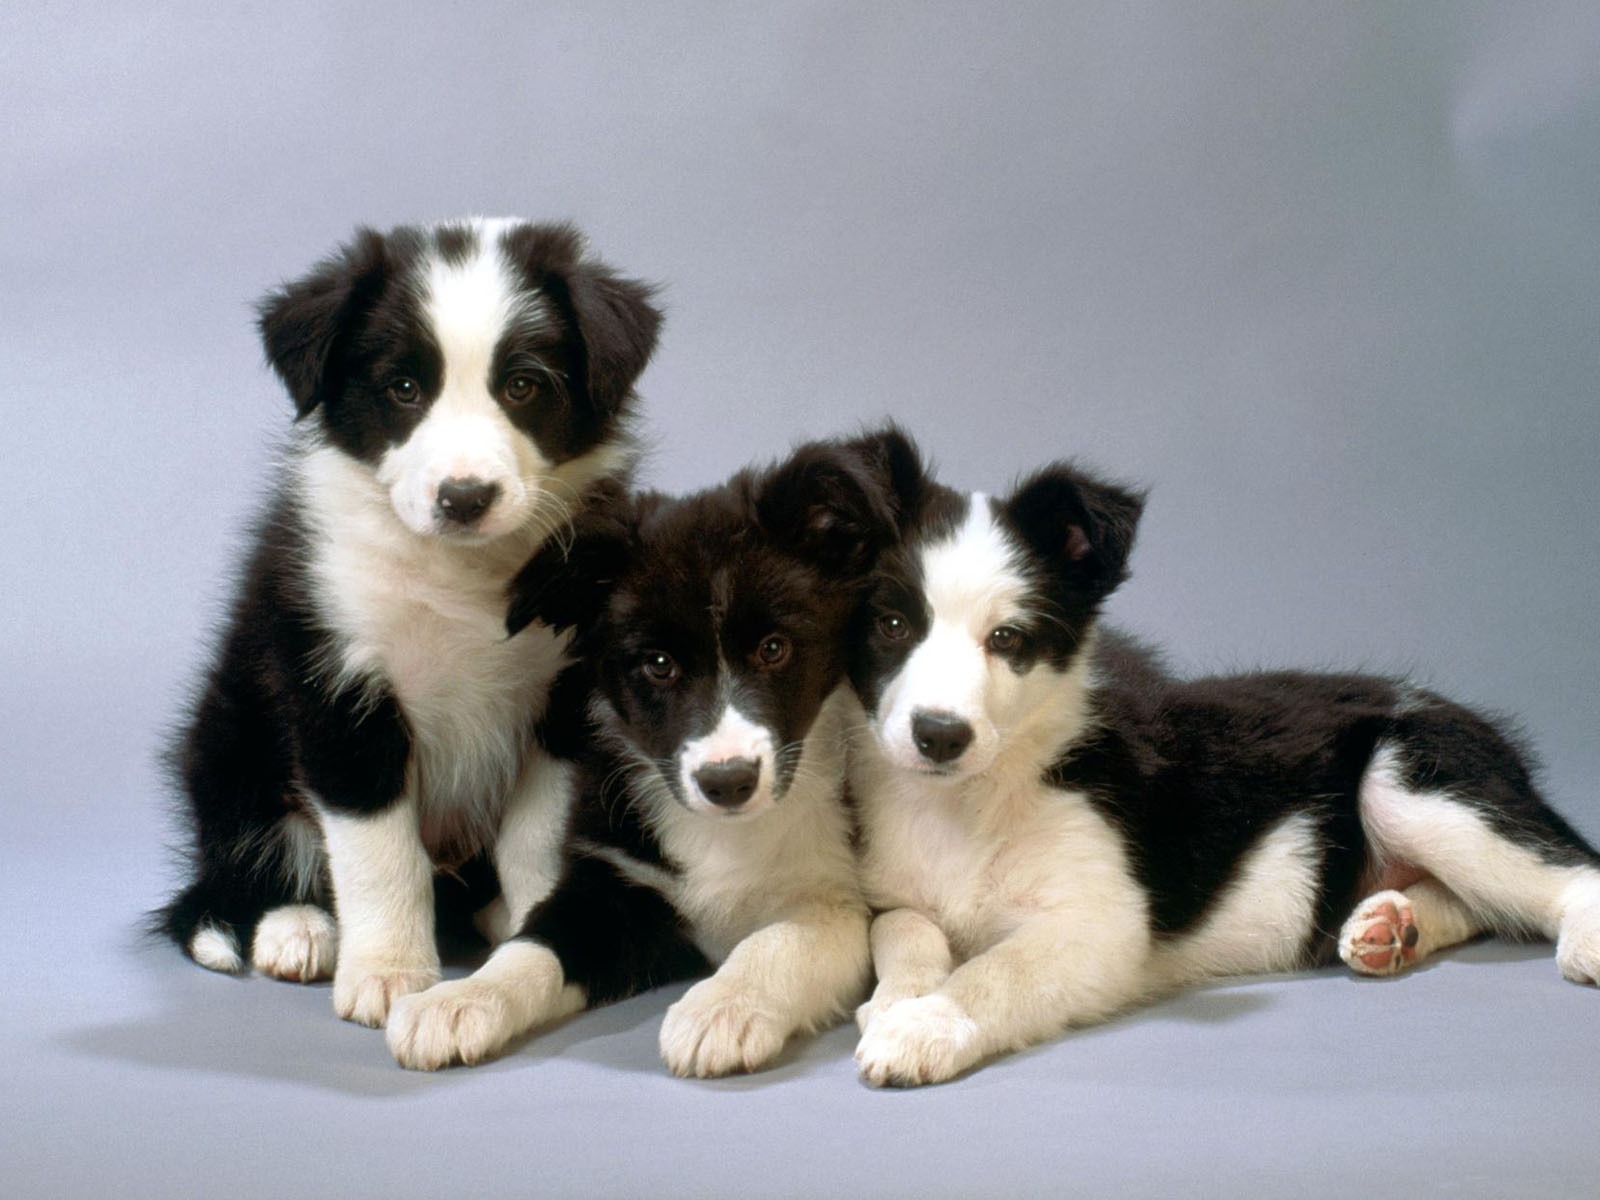 Puppy Photo HD wallpapers (1) #7 - 1600x1200